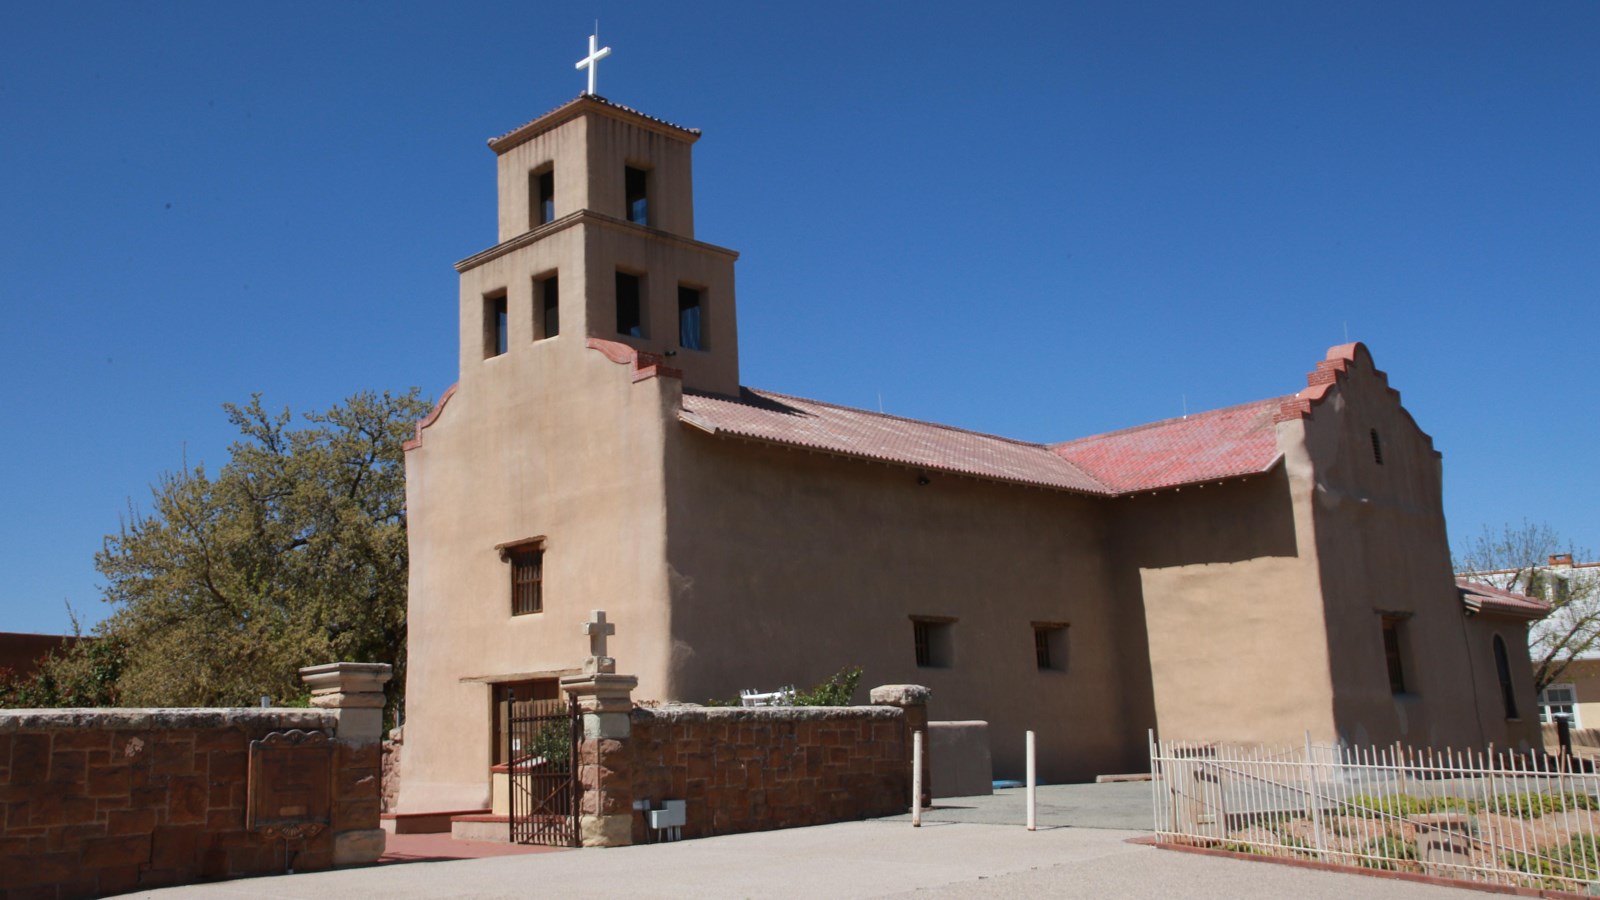 A large, single bell-towered, adobe chapel with a large stone wall surrounding it.